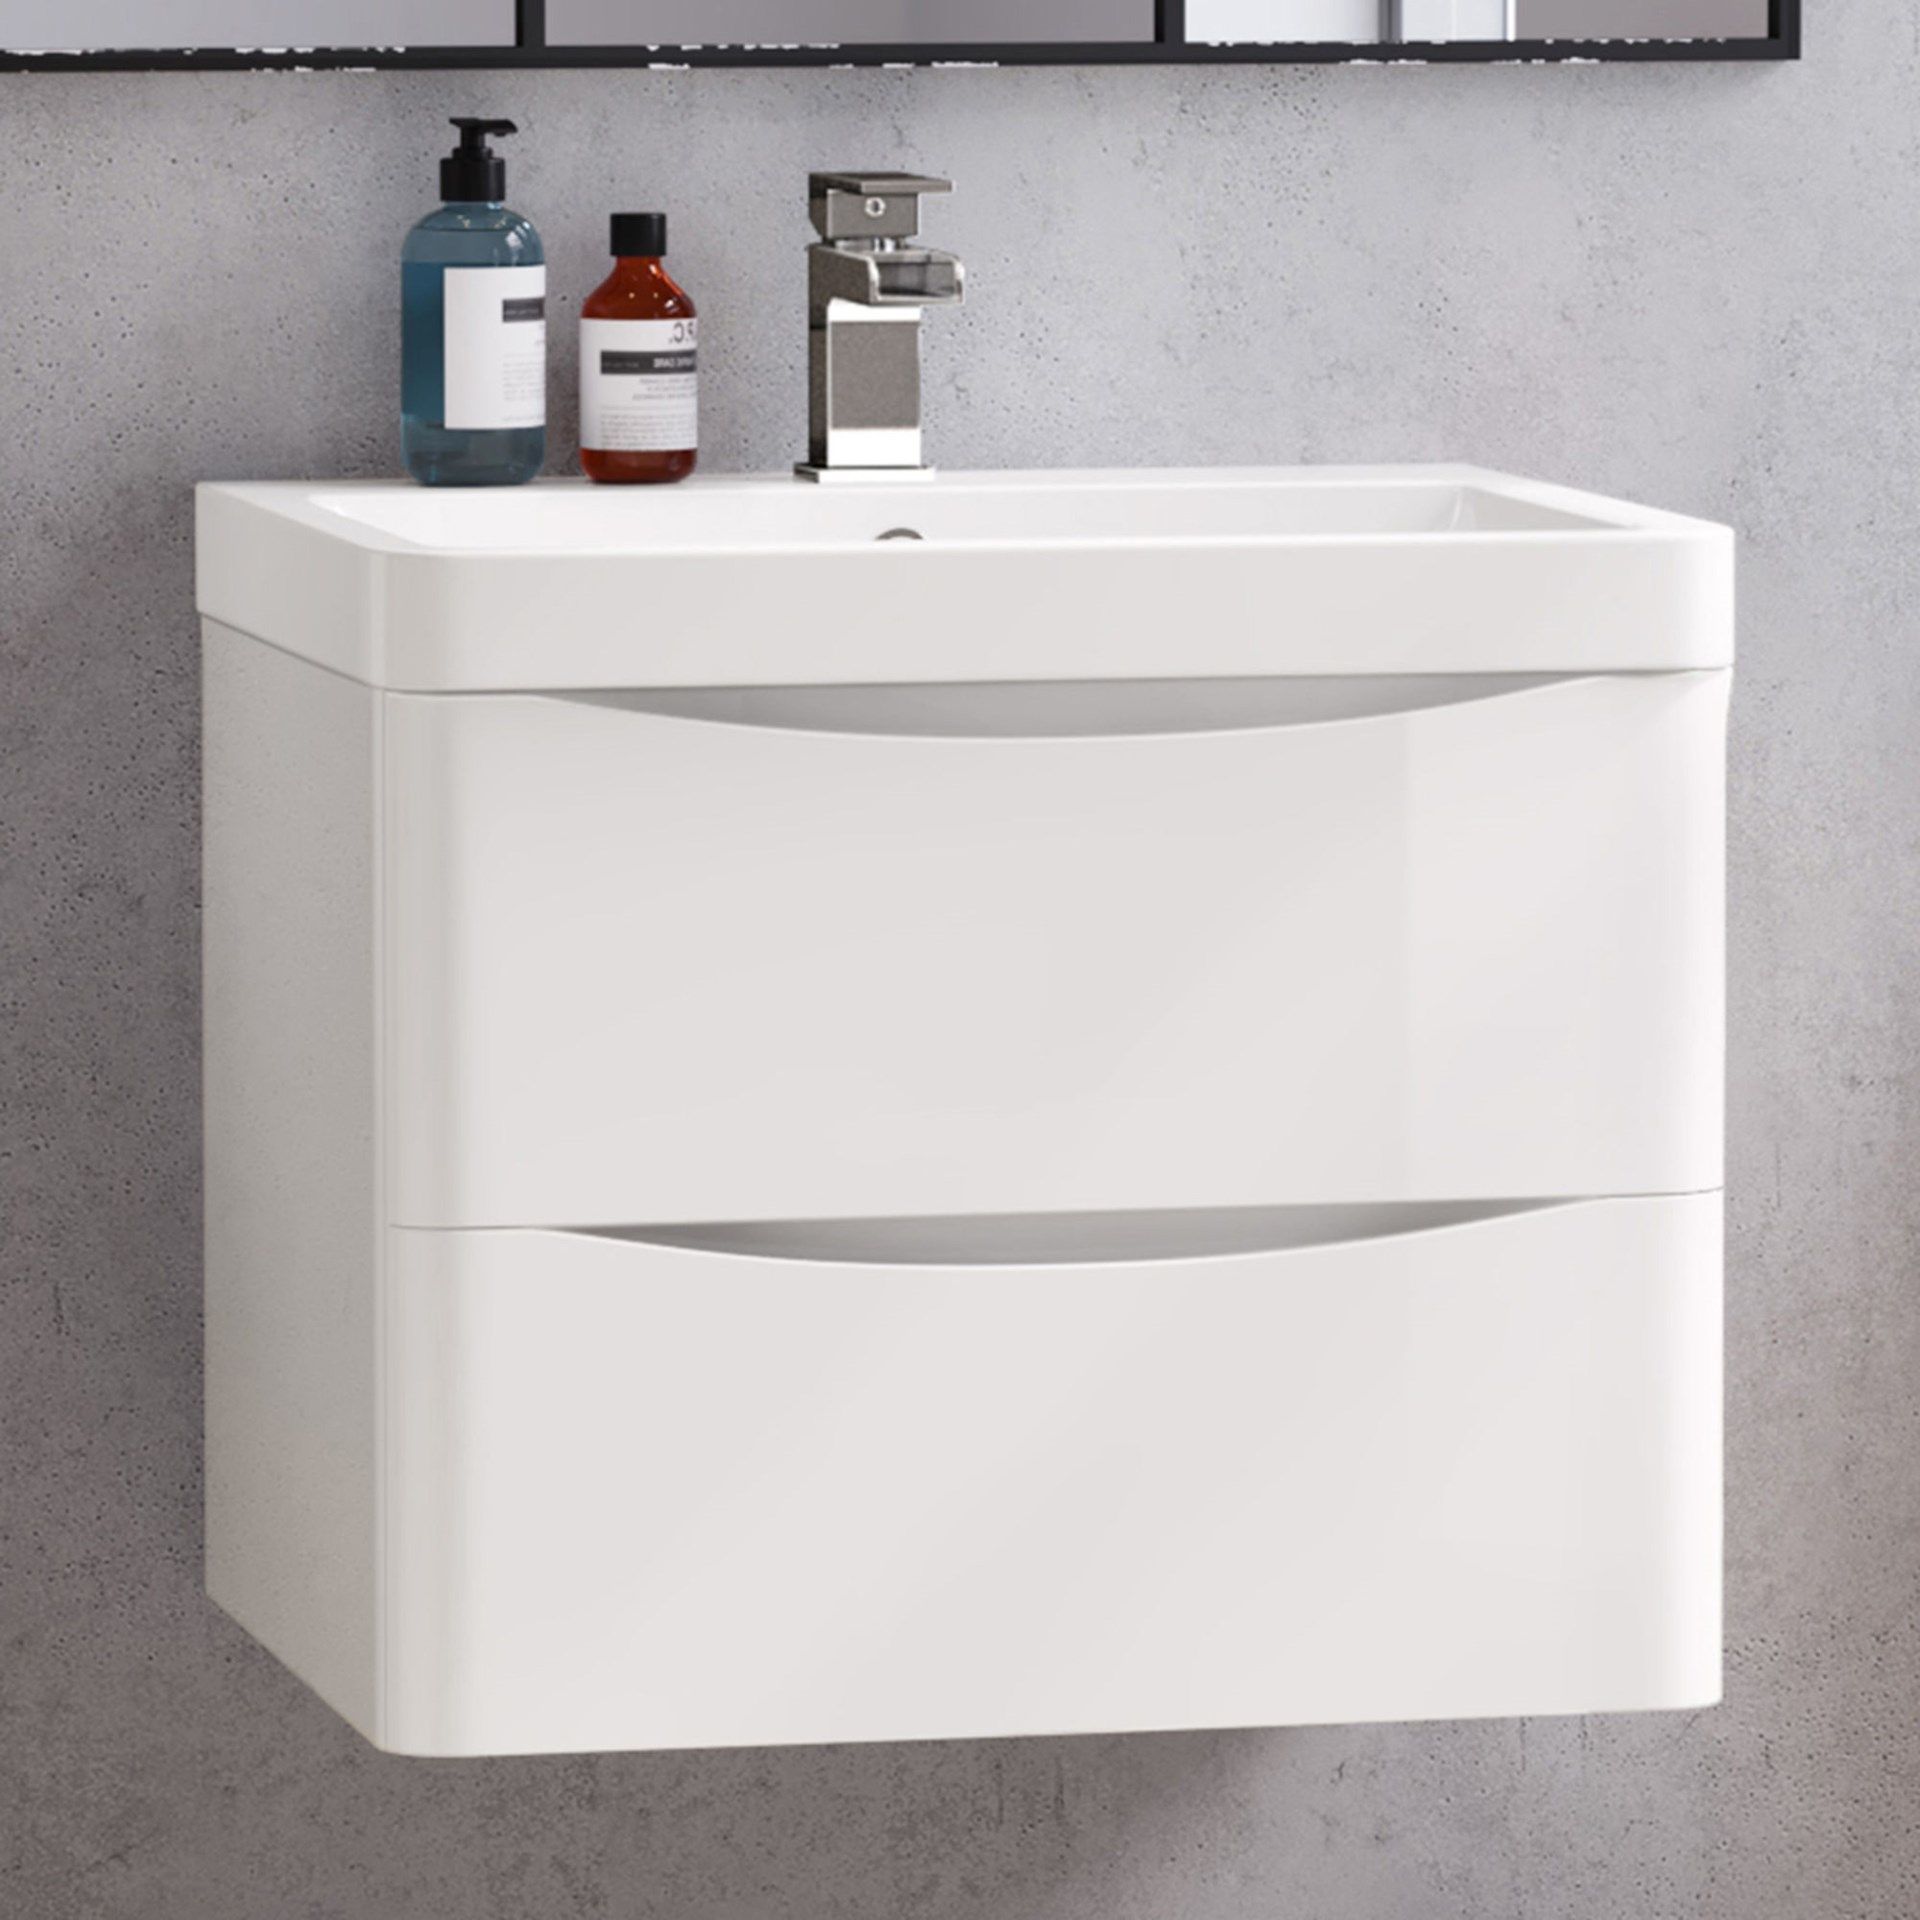 New & Boxed 600mm Austin Gloss White Built In Basin Drawer Unit - Wall Hung.Mf2417 RRP £749.99... - Image 3 of 3